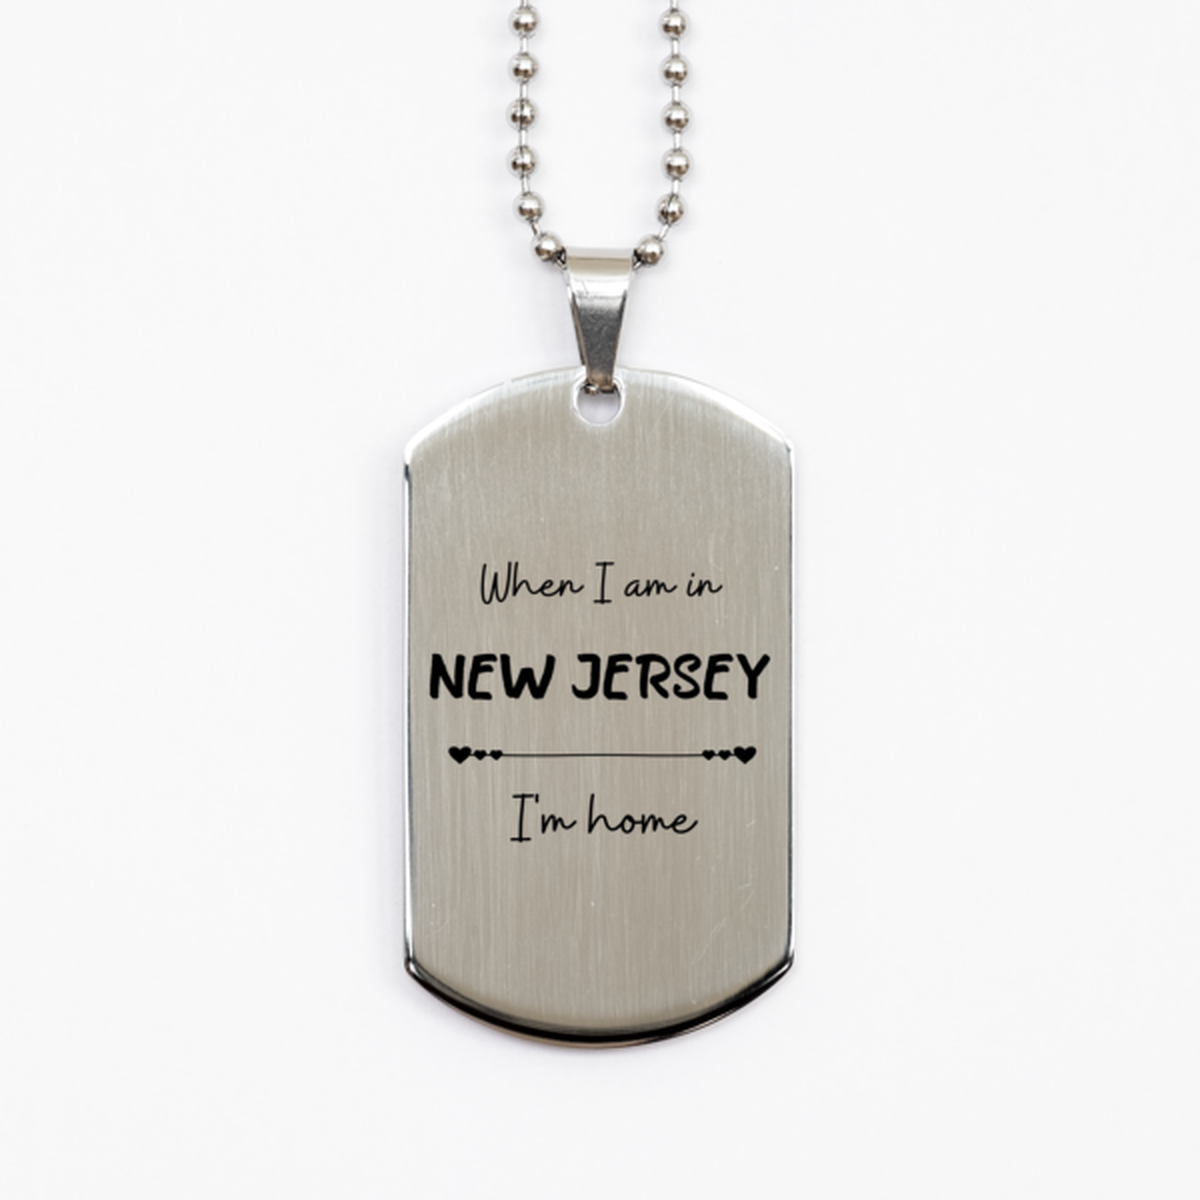 When I am in New Jersey I'm home Silver Dog Tag, Cheap Gifts For New Jersey, State New Jersey Birthday Gifts for Friends Coworker